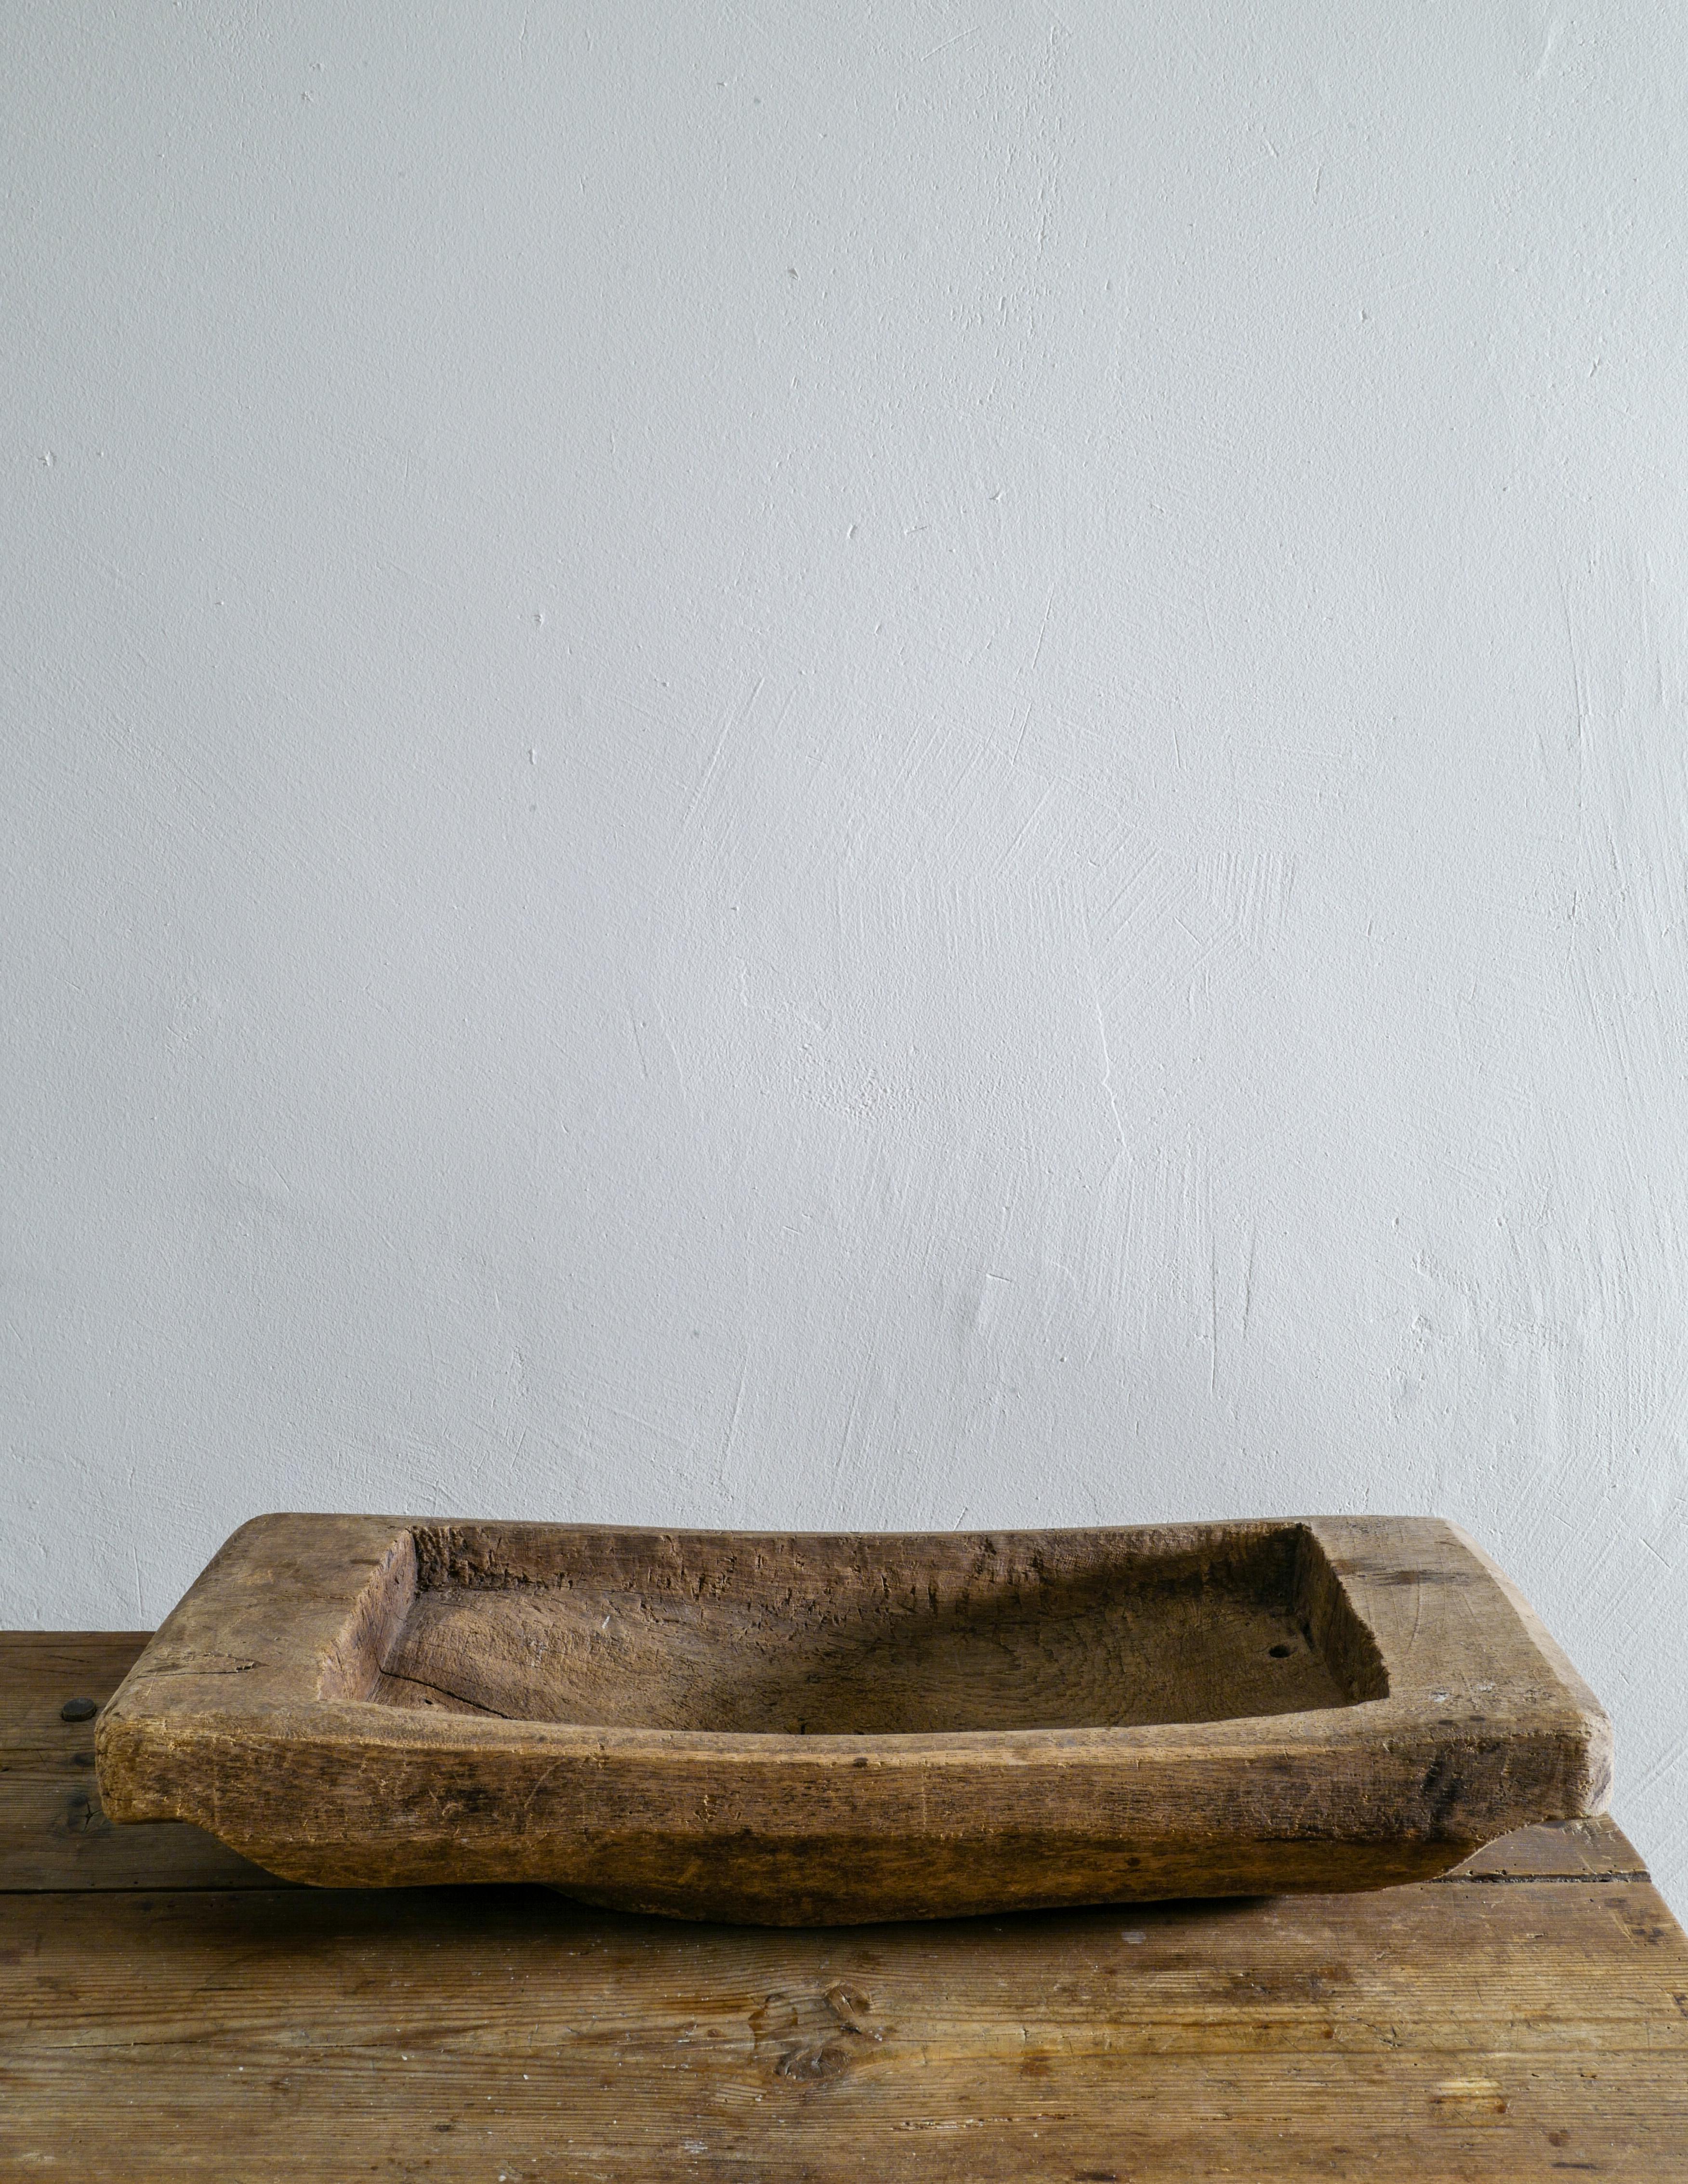 Rare Swedish tray made out of solid oak from the late 1800s. The tray is showing beautiful patina form age and use. Normally these trays were not produced in oak but this one is and have really aged nicely.